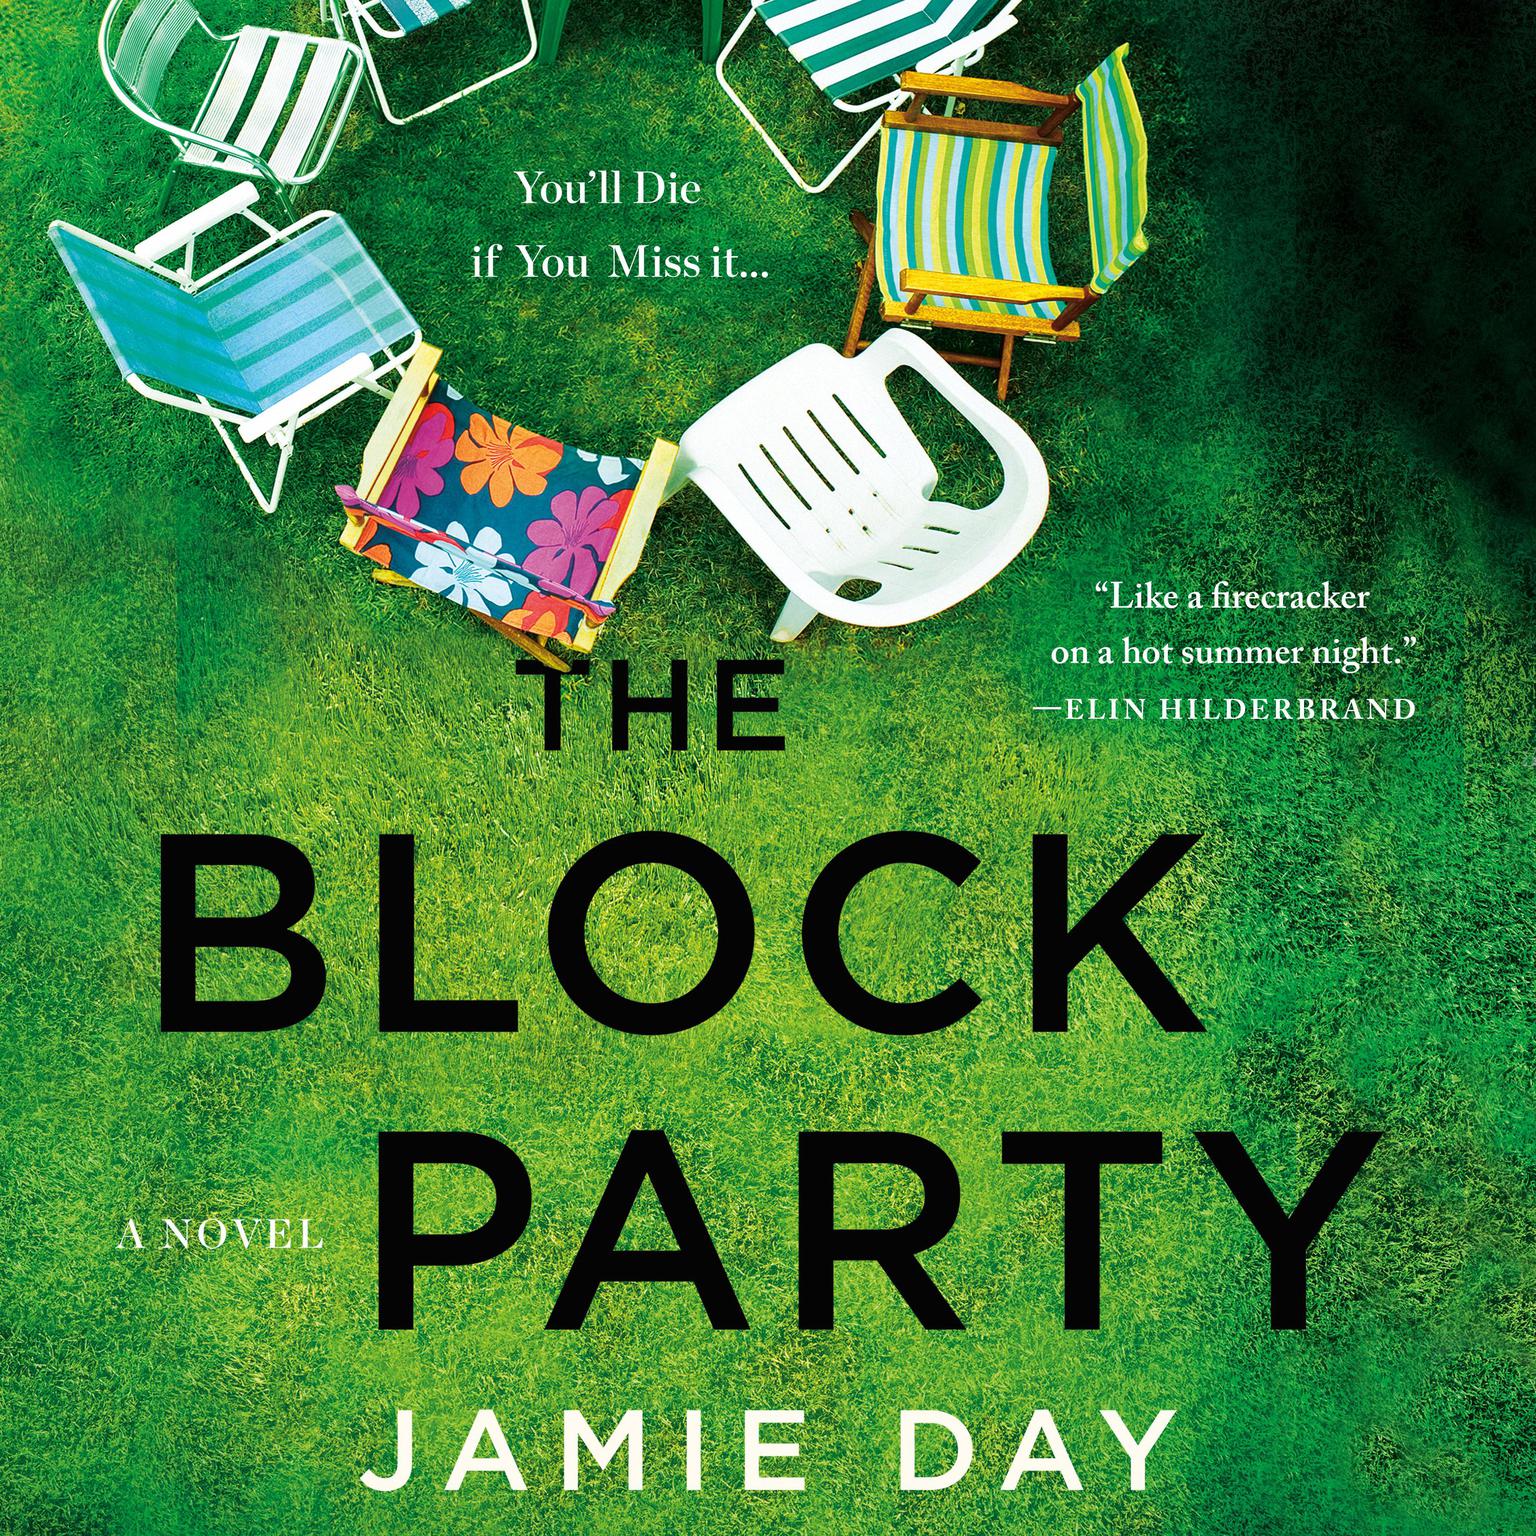 The Block Party: A Novel Audiobook, by Jamie Day